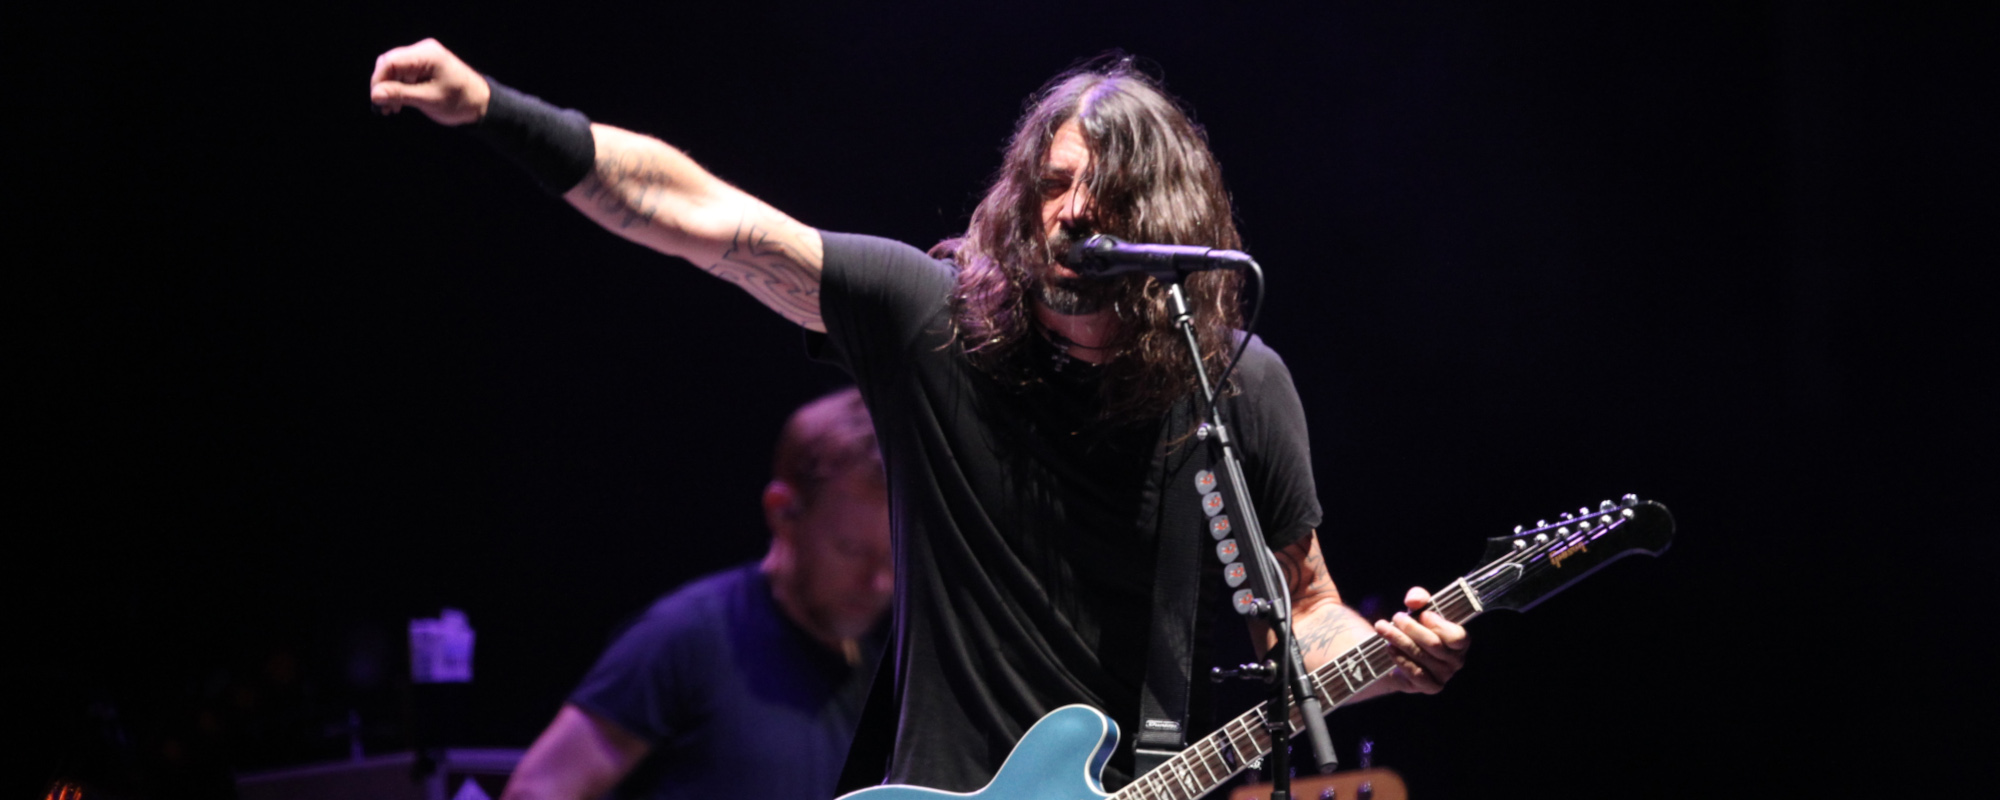 Dave Grohl Covers The Clash’s “Train In Vain” for Hanukkah Sessions Day 7